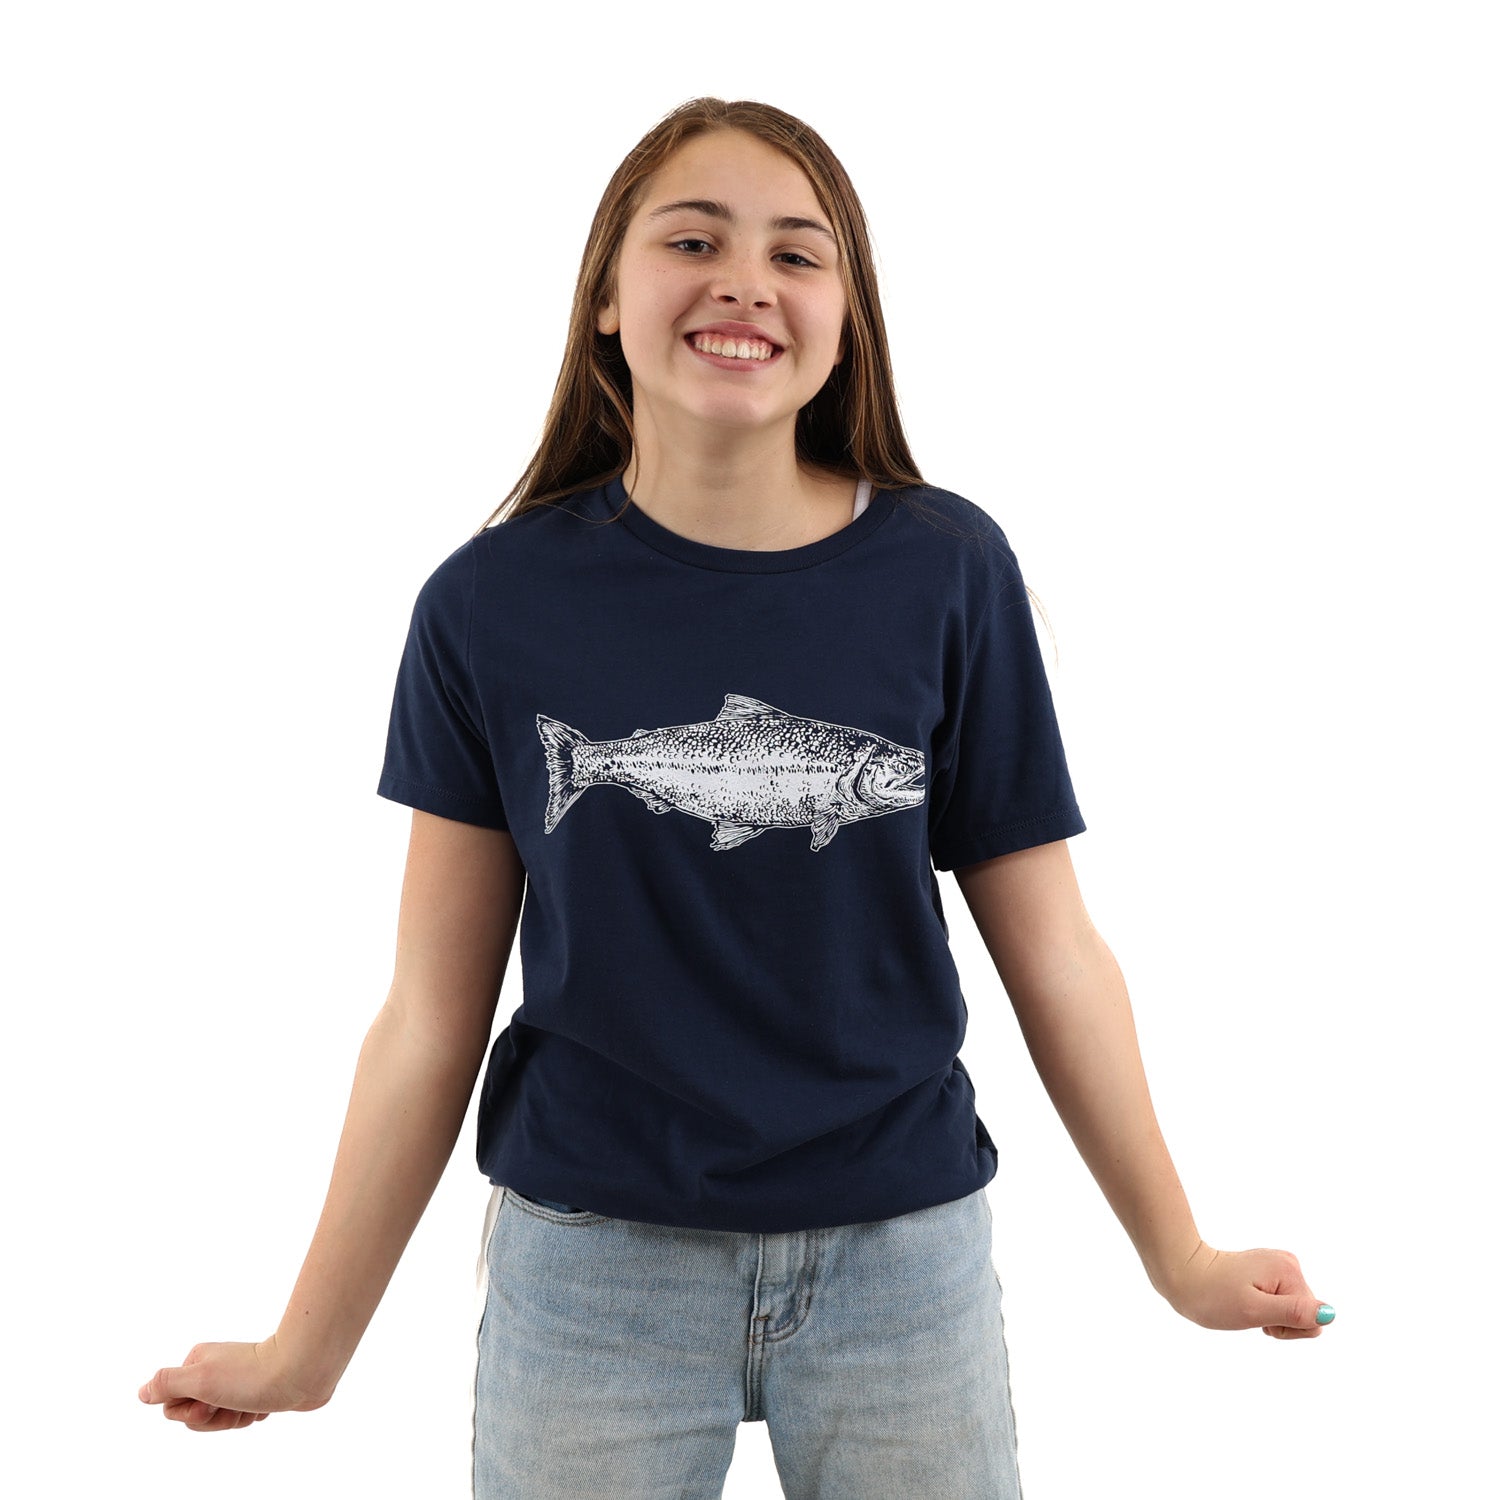 Girl wearing fitted navy blue t shirt with a salmon printed in white ink